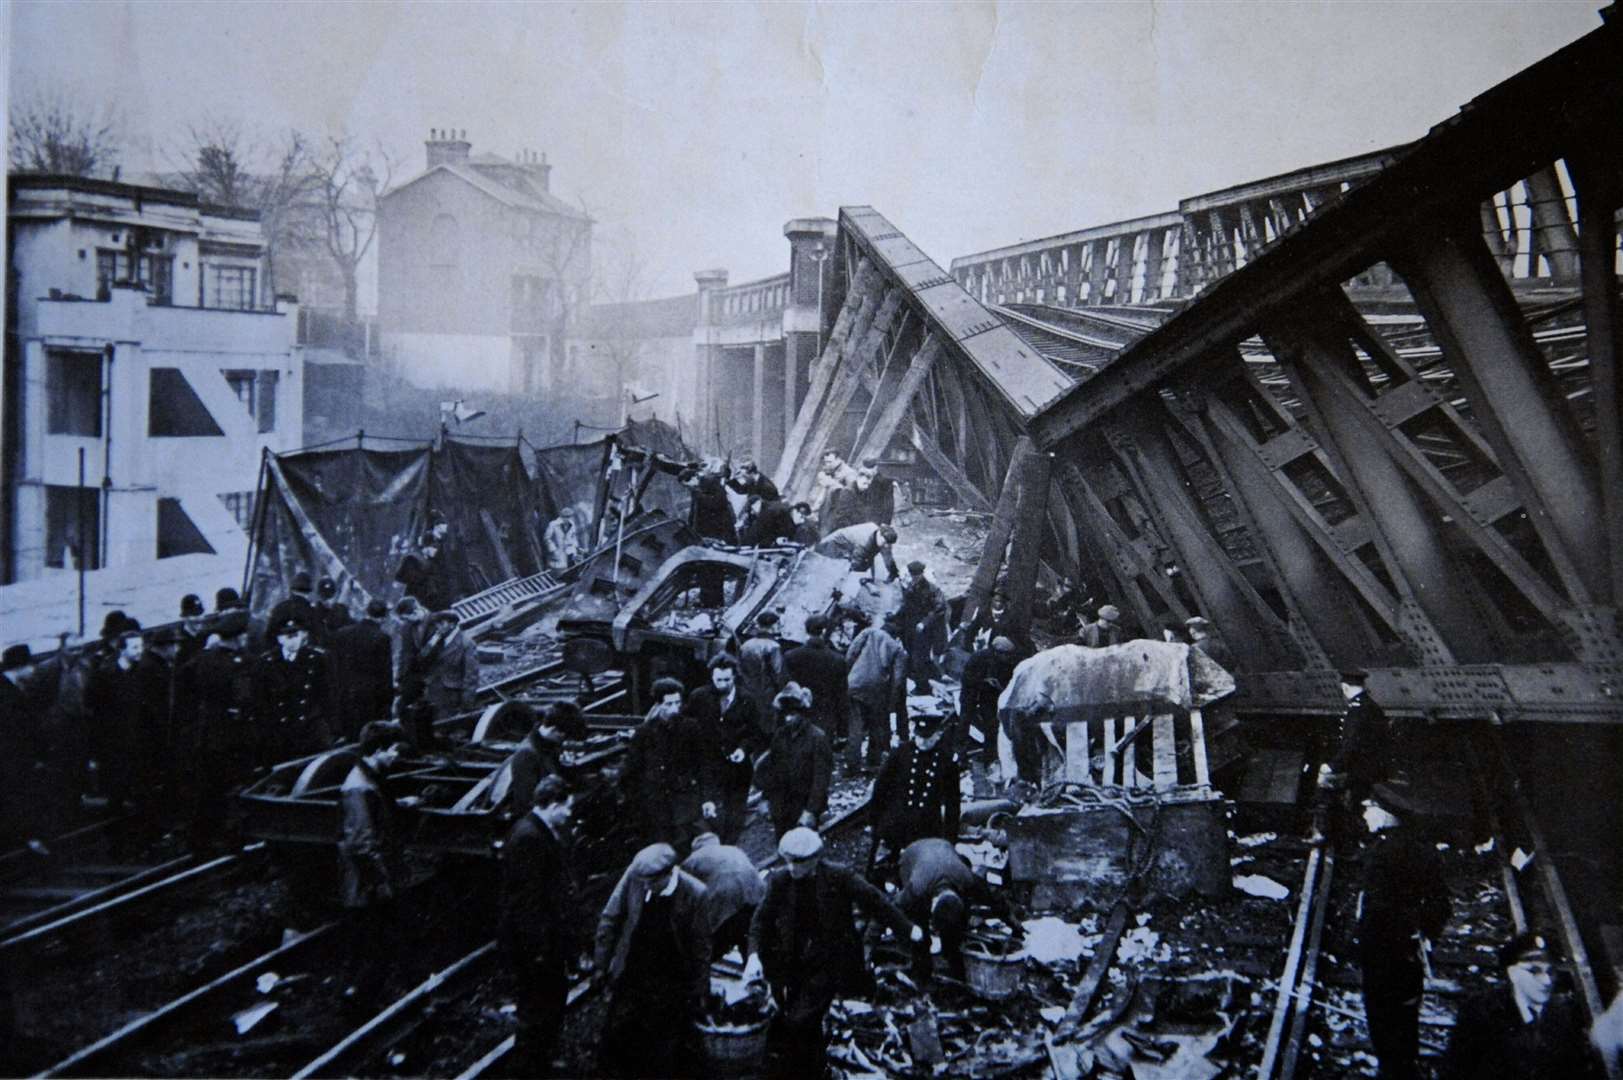 The scene of the Lewisham train crash in which 90 people were killed. Submitted by Donald Corke